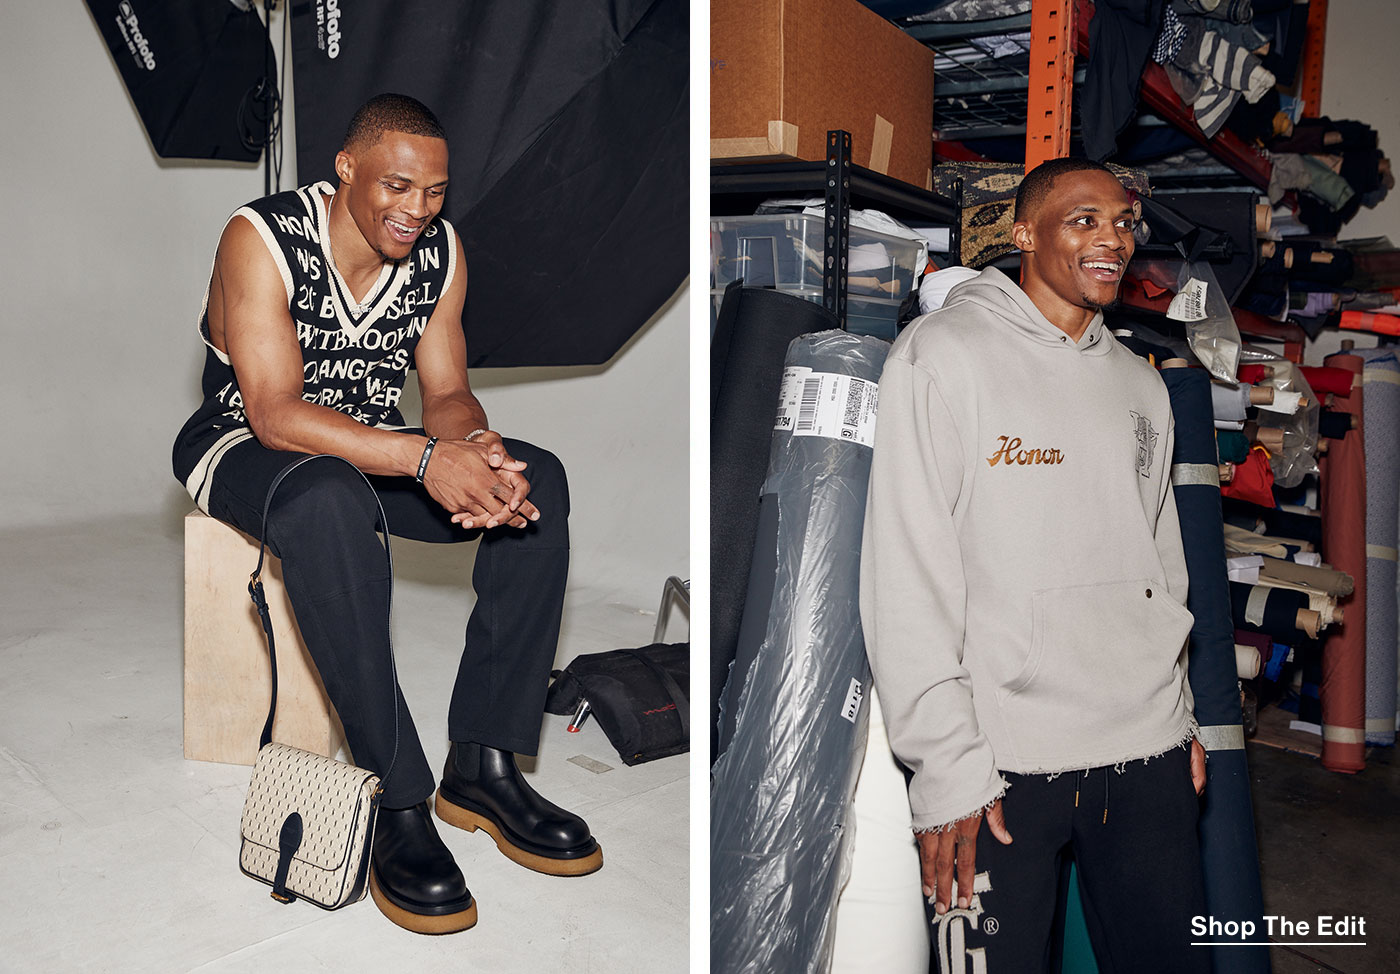 Russell Westbrook sitting with a graphic black and white tank top to the left and a grey sweater on the right.